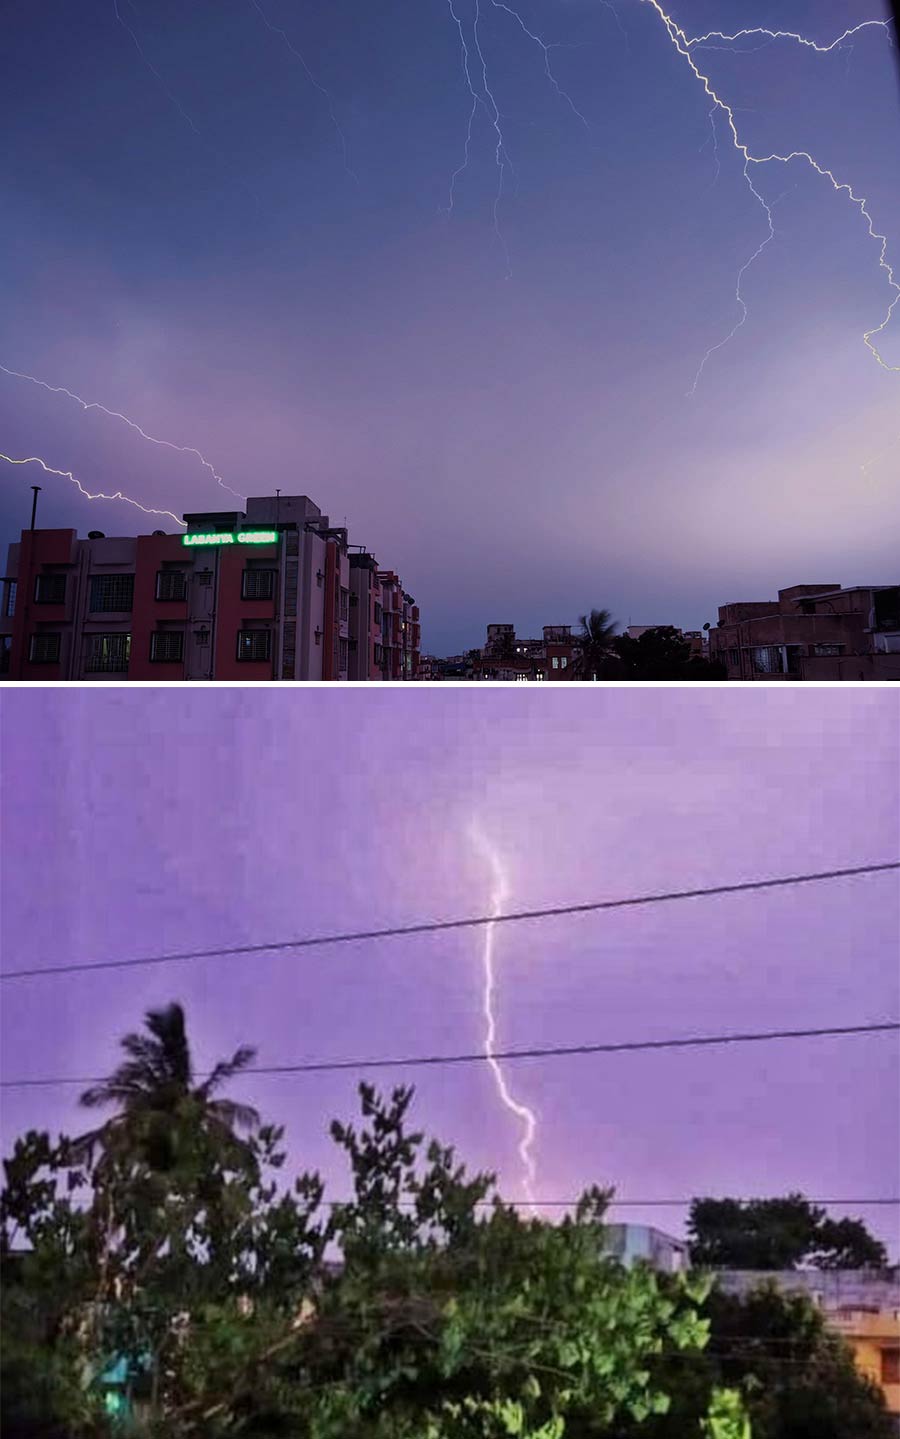 The thunderstorm that brought much-needed respite to Kolkatans teased residents of Barrackpore, Kalyani and other towns to the north of Kolkata with mere gusts of moisture-laden winds and streaks of lightning across the sky. Rain played truant